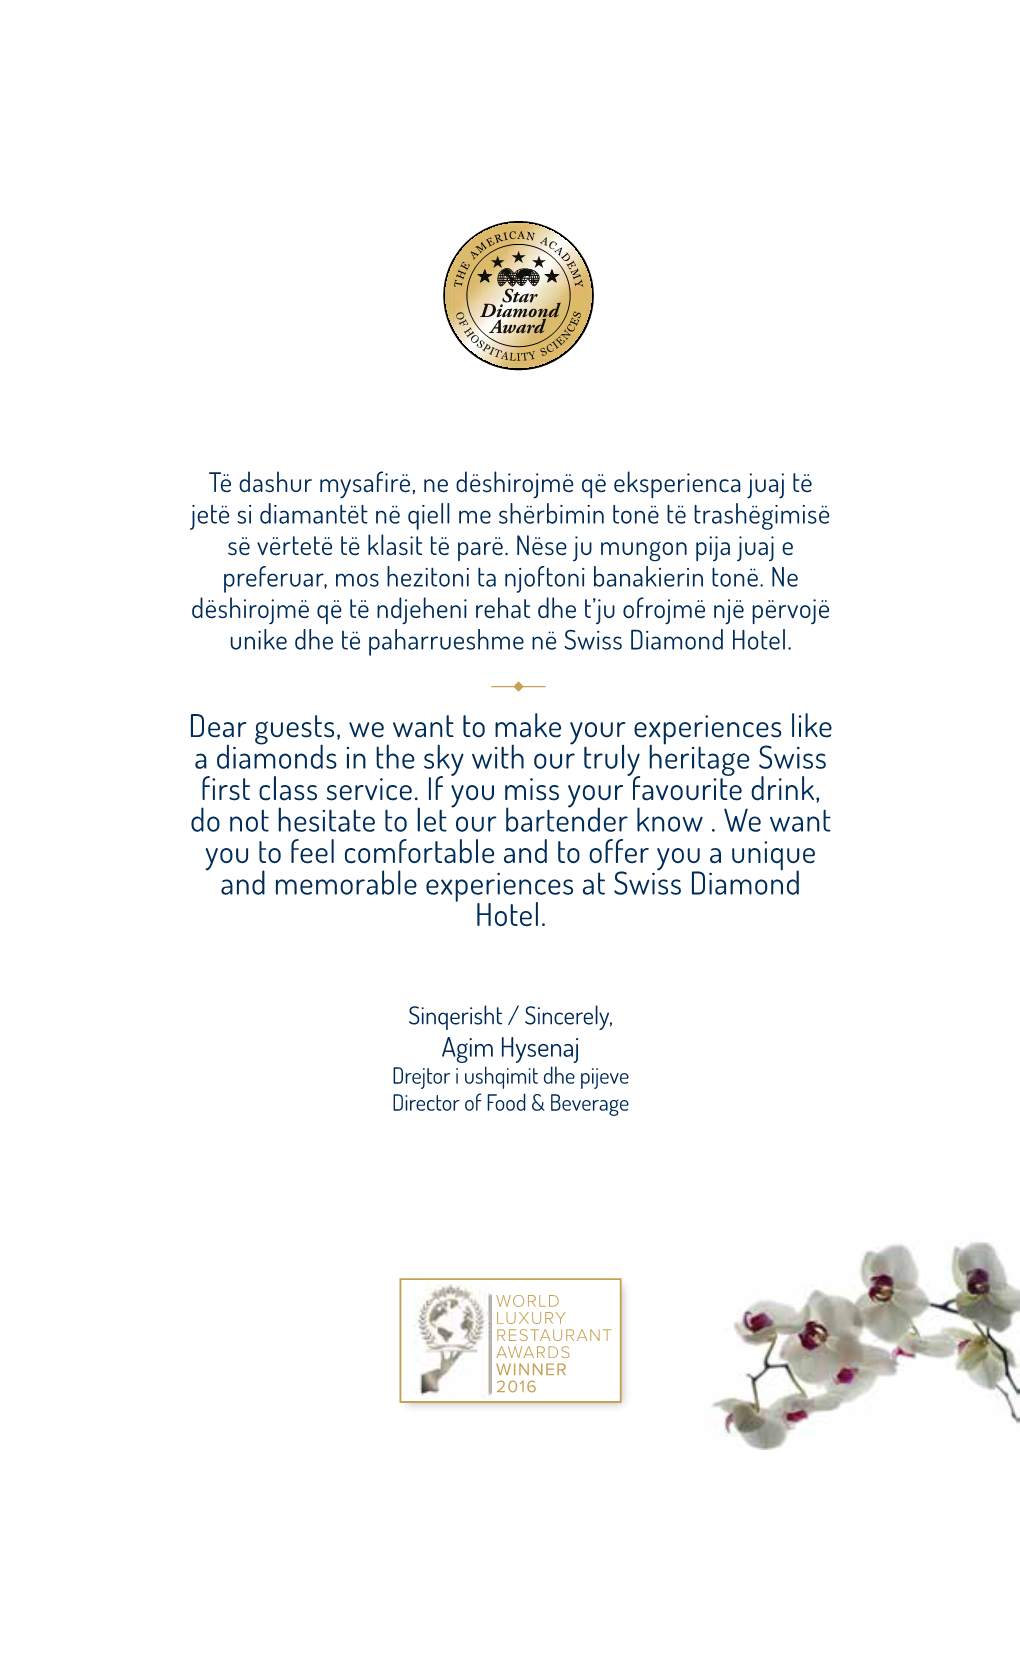 Dear Guests, We Want to Make Your Experiences Like a Diamonds in the Sky with Our Truly Heritage Swiss First Class Service